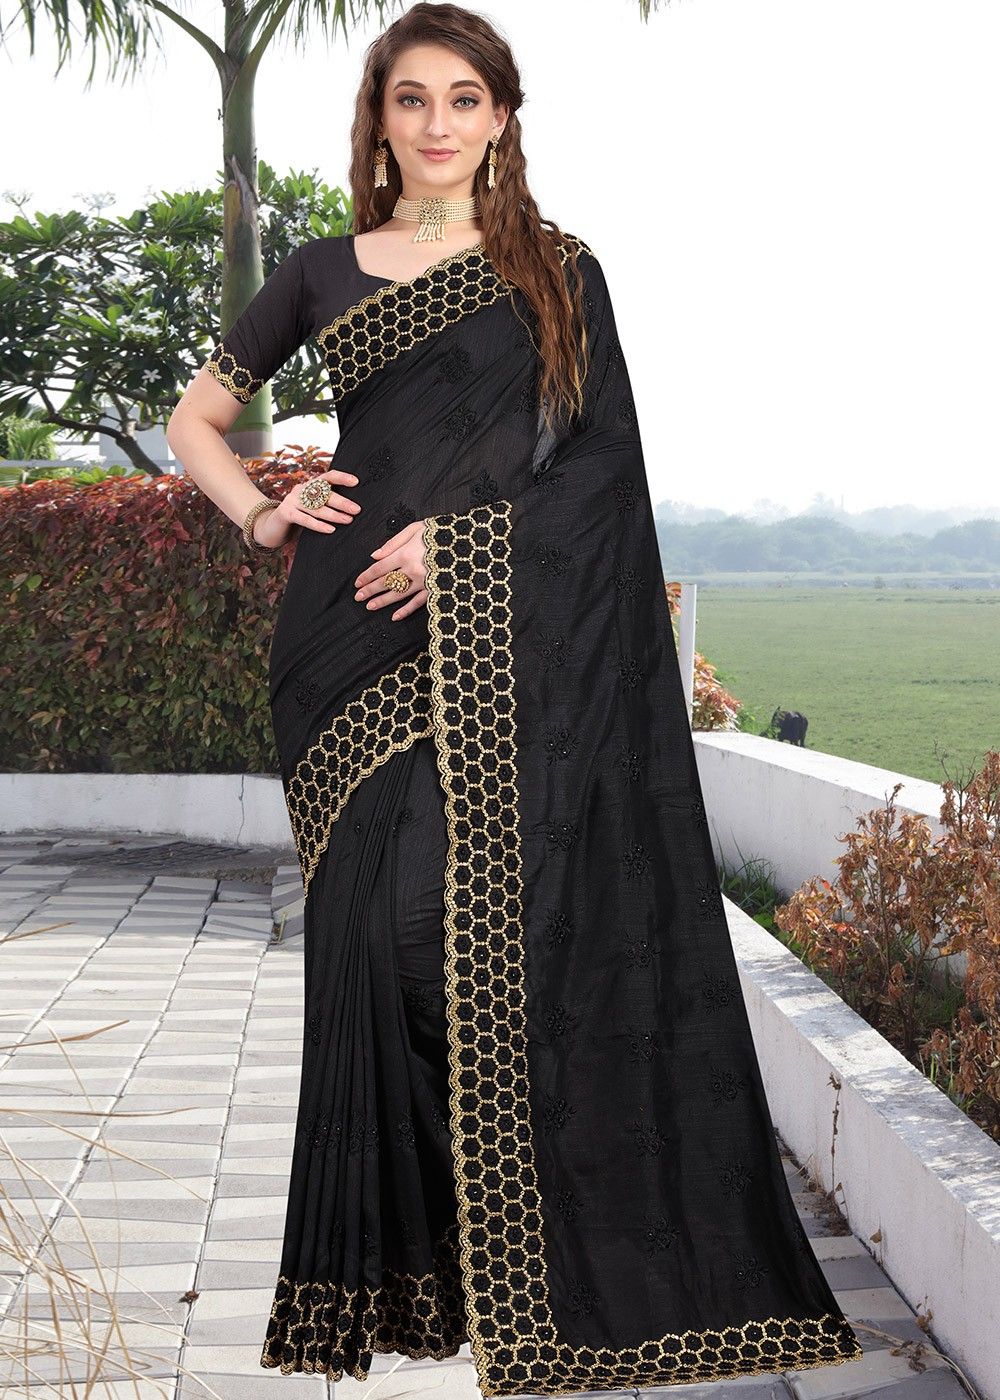 Saree – The Awesome Indian Traditional Attire - Shopkund